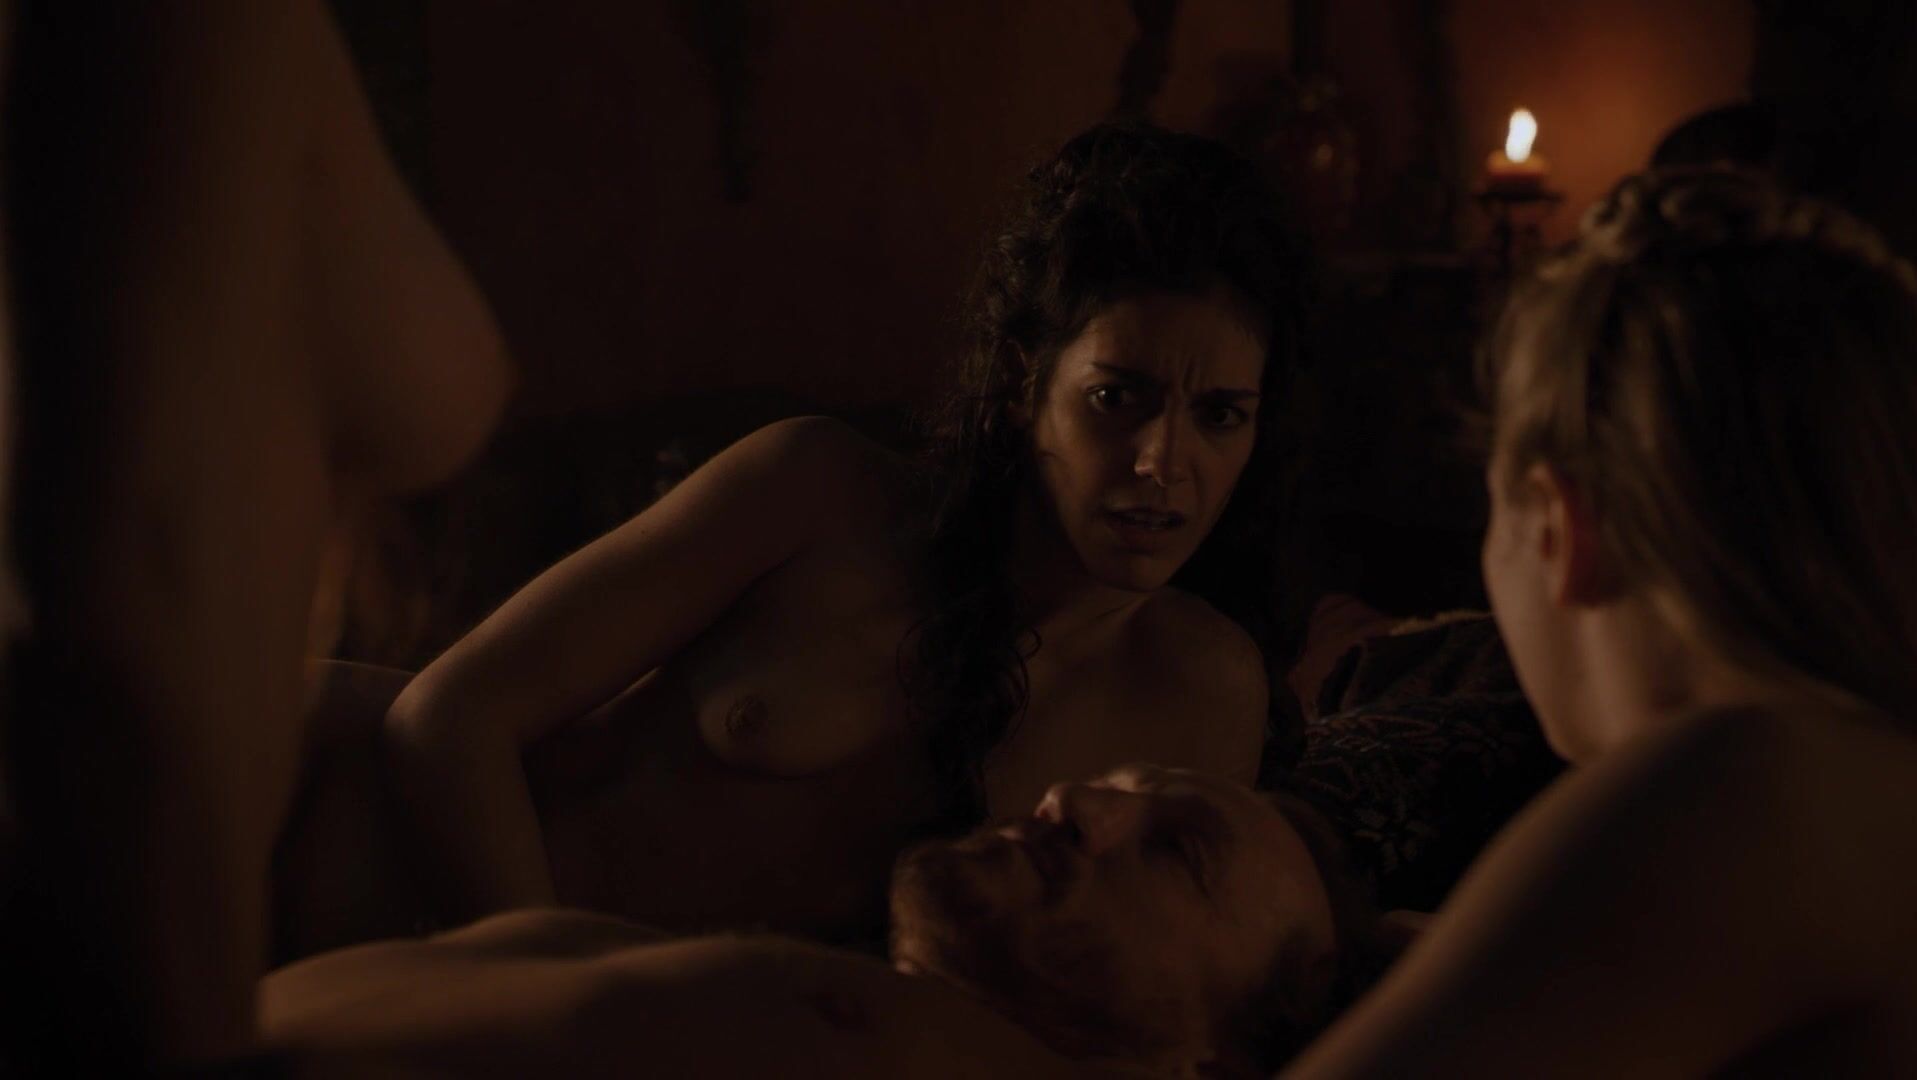 Boobies Marina Lawrence-Mahrra goes nude in Game of Thrones s08e01 (2019) Fishnet - 1